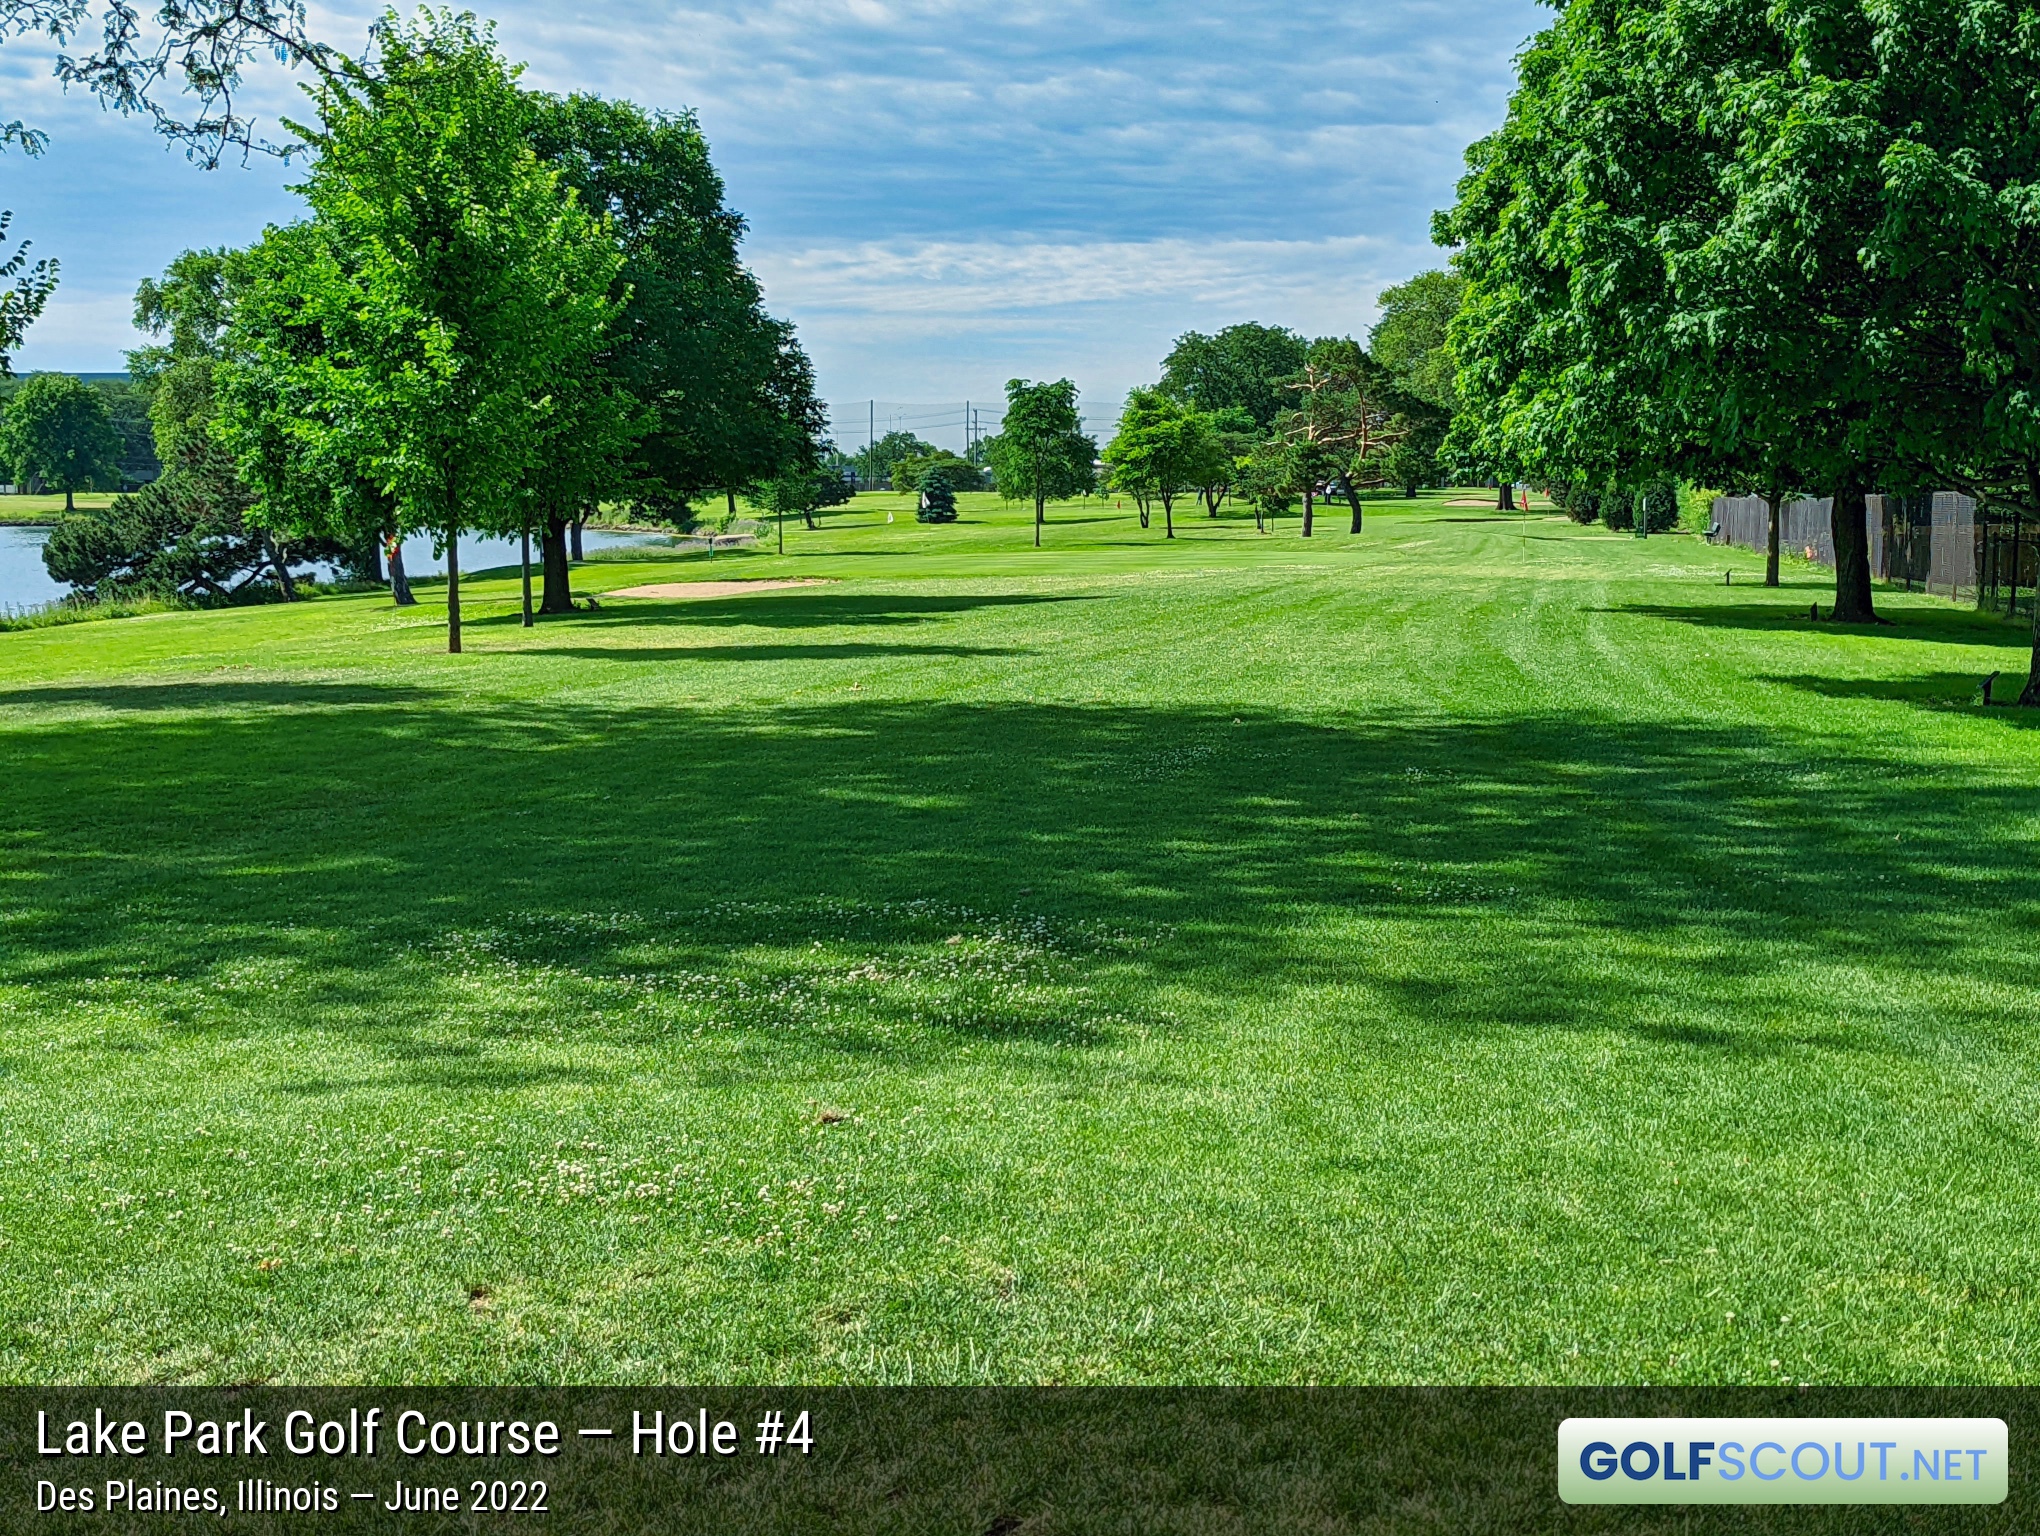 Photo of hole #4 at Lake Park Golf Course in Des Plaines, Illinois. 